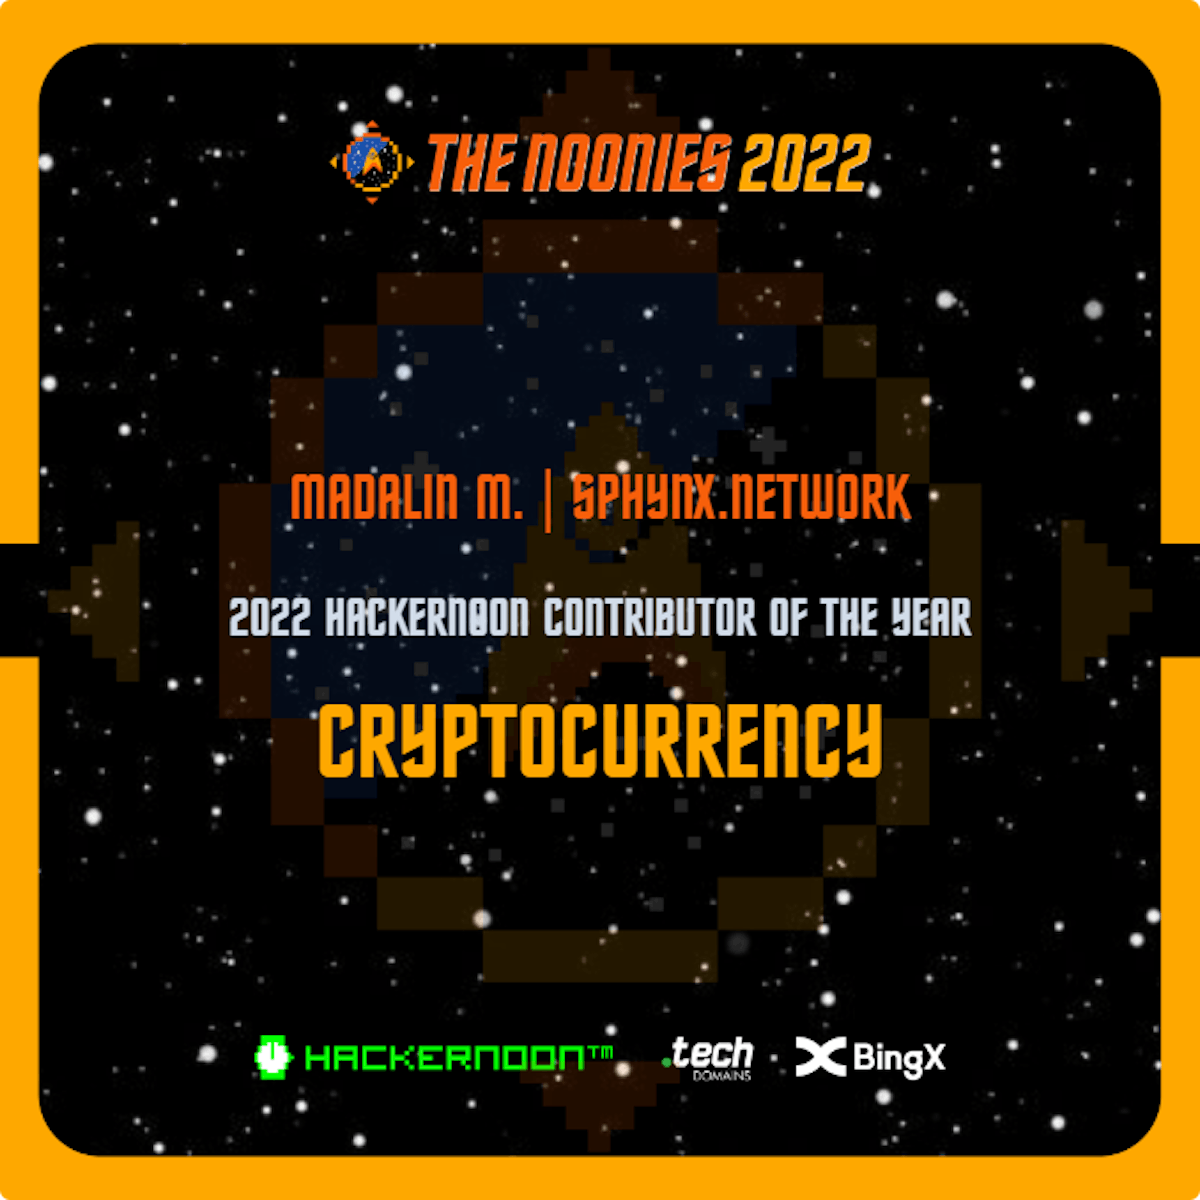 featured image - The Noonies 2022 Award Goes to Madalin Muraretiu - Contributor of The Year - Cryptocurrency Edition